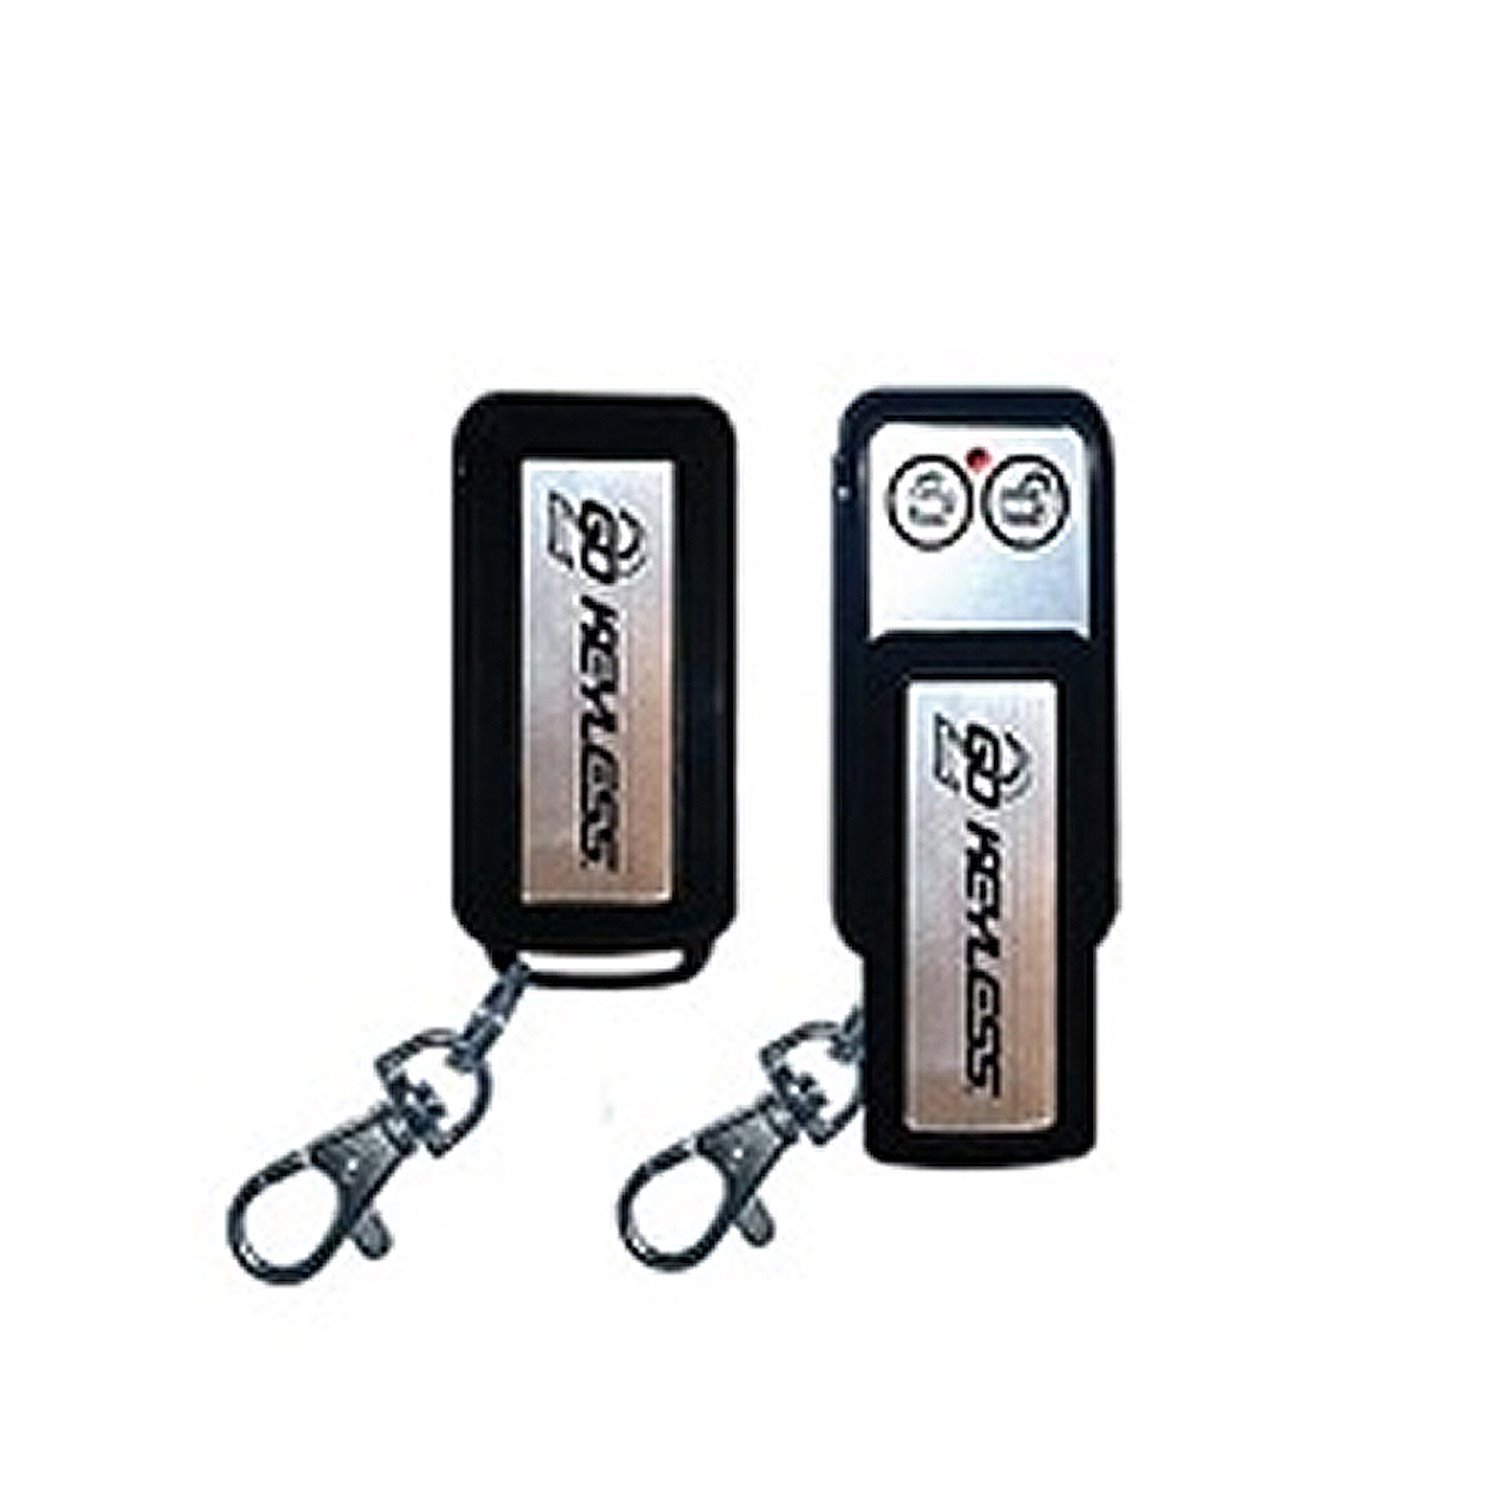 DGD-P-FOB Additional Key Fob for PBS-I & PBSII Systems